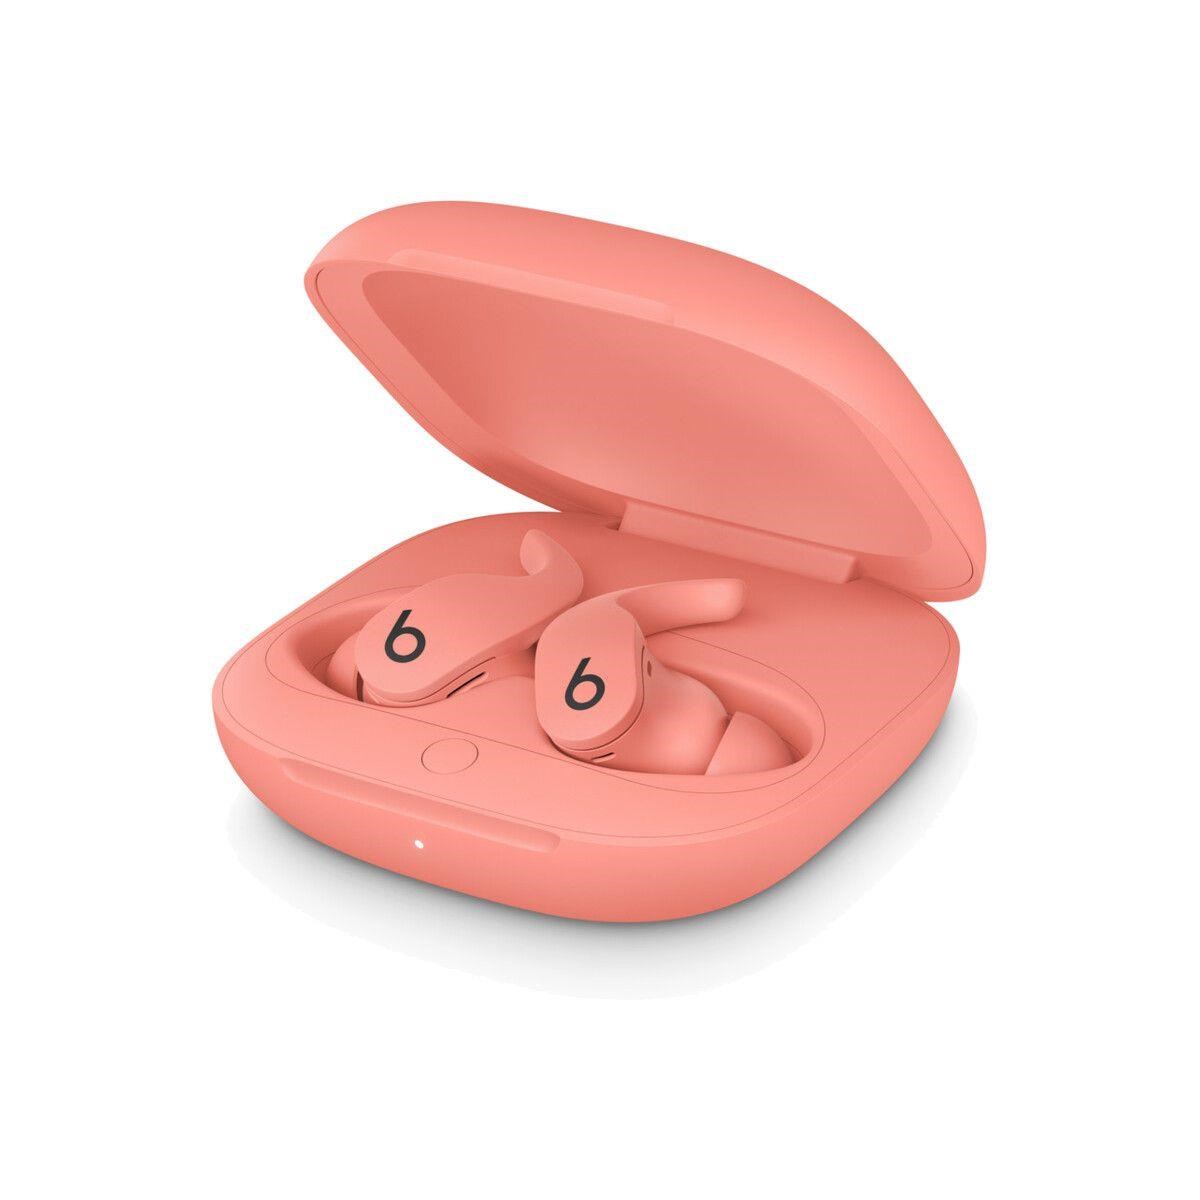 Beats Fit Pro True Wireless Earbuds - Coral Pink0 